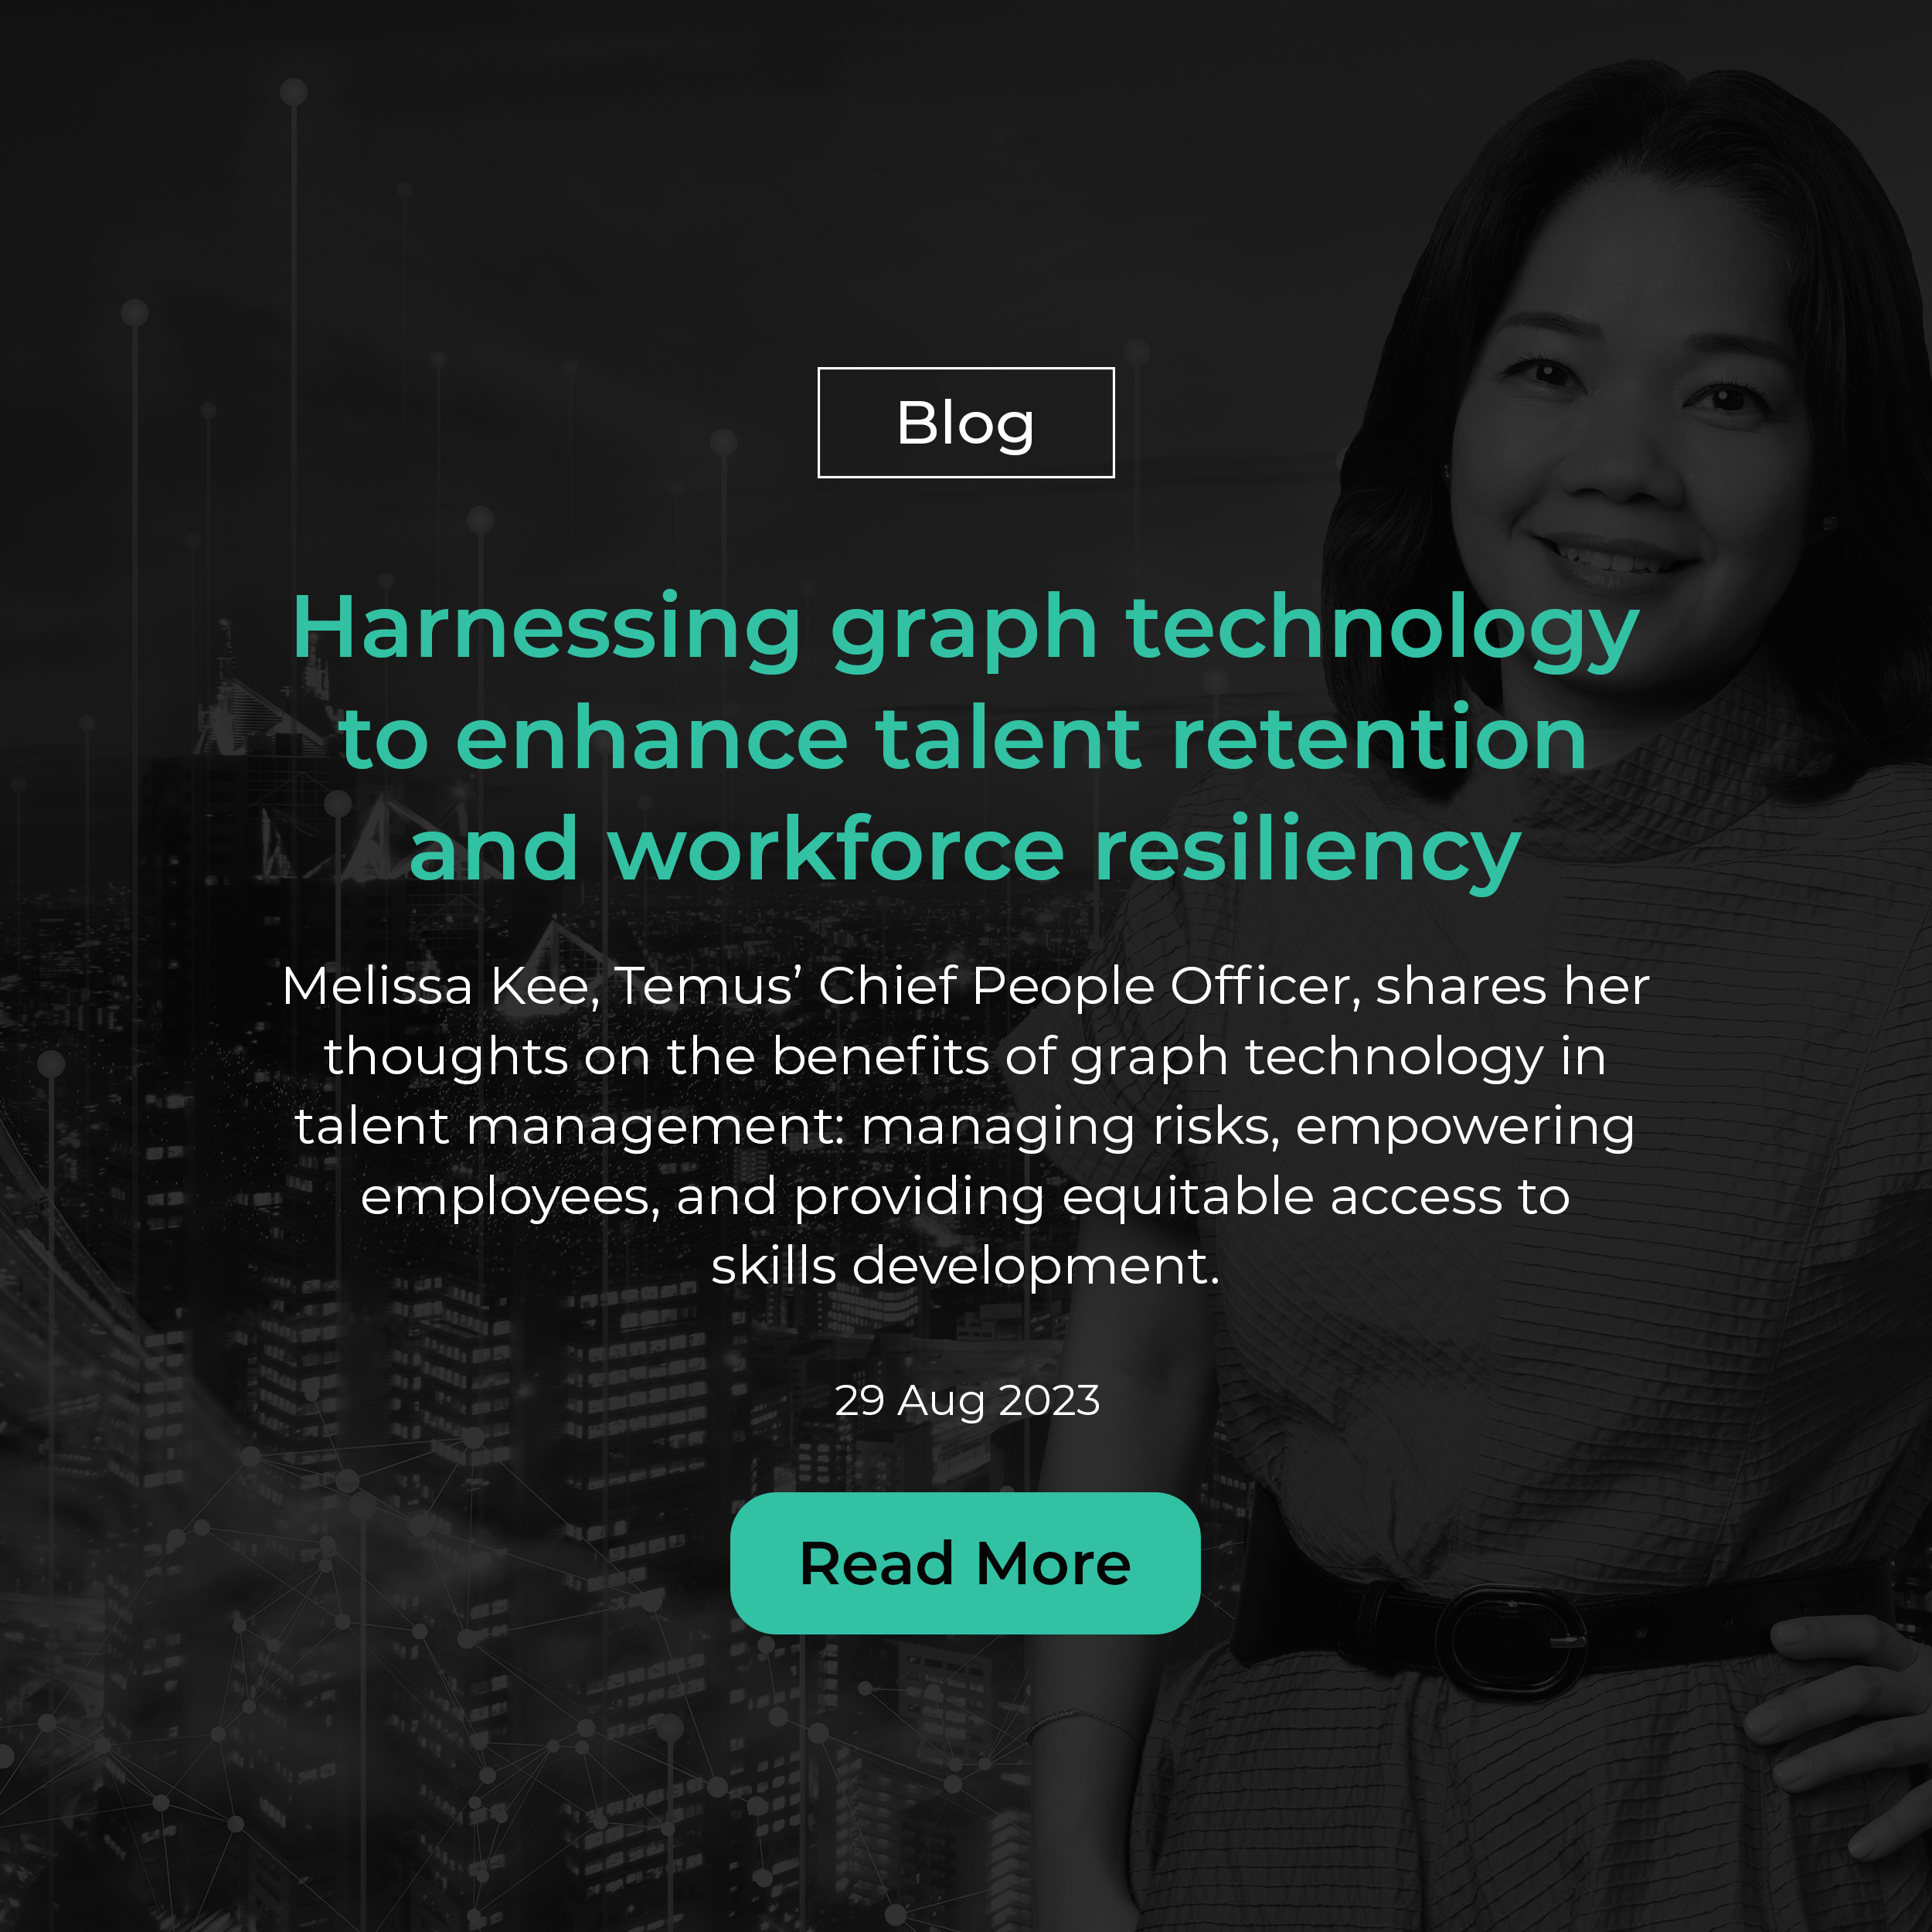 Harnessing Graph Technology to Enhance Talent Retention and Workforce Resiliency